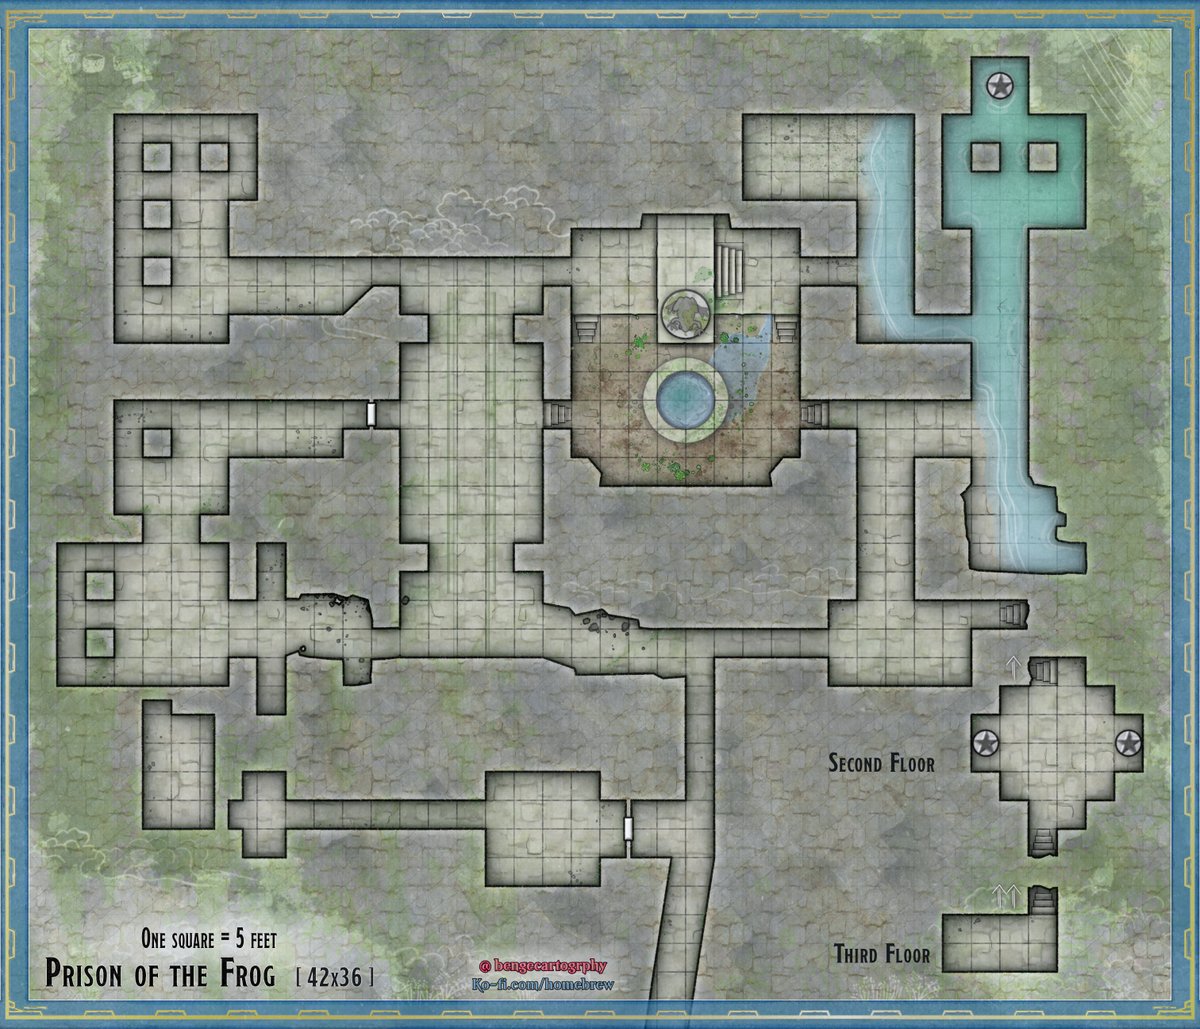 Prison of the Frog [ 42x36 ] 

for free use in your favorite VTT this was a fun one you can find the version without a grid on my Ko-Fi for free.

You could decide to close off the lower passageway and have your players descend from a hole in the upper room

#dnd #ttrpgs